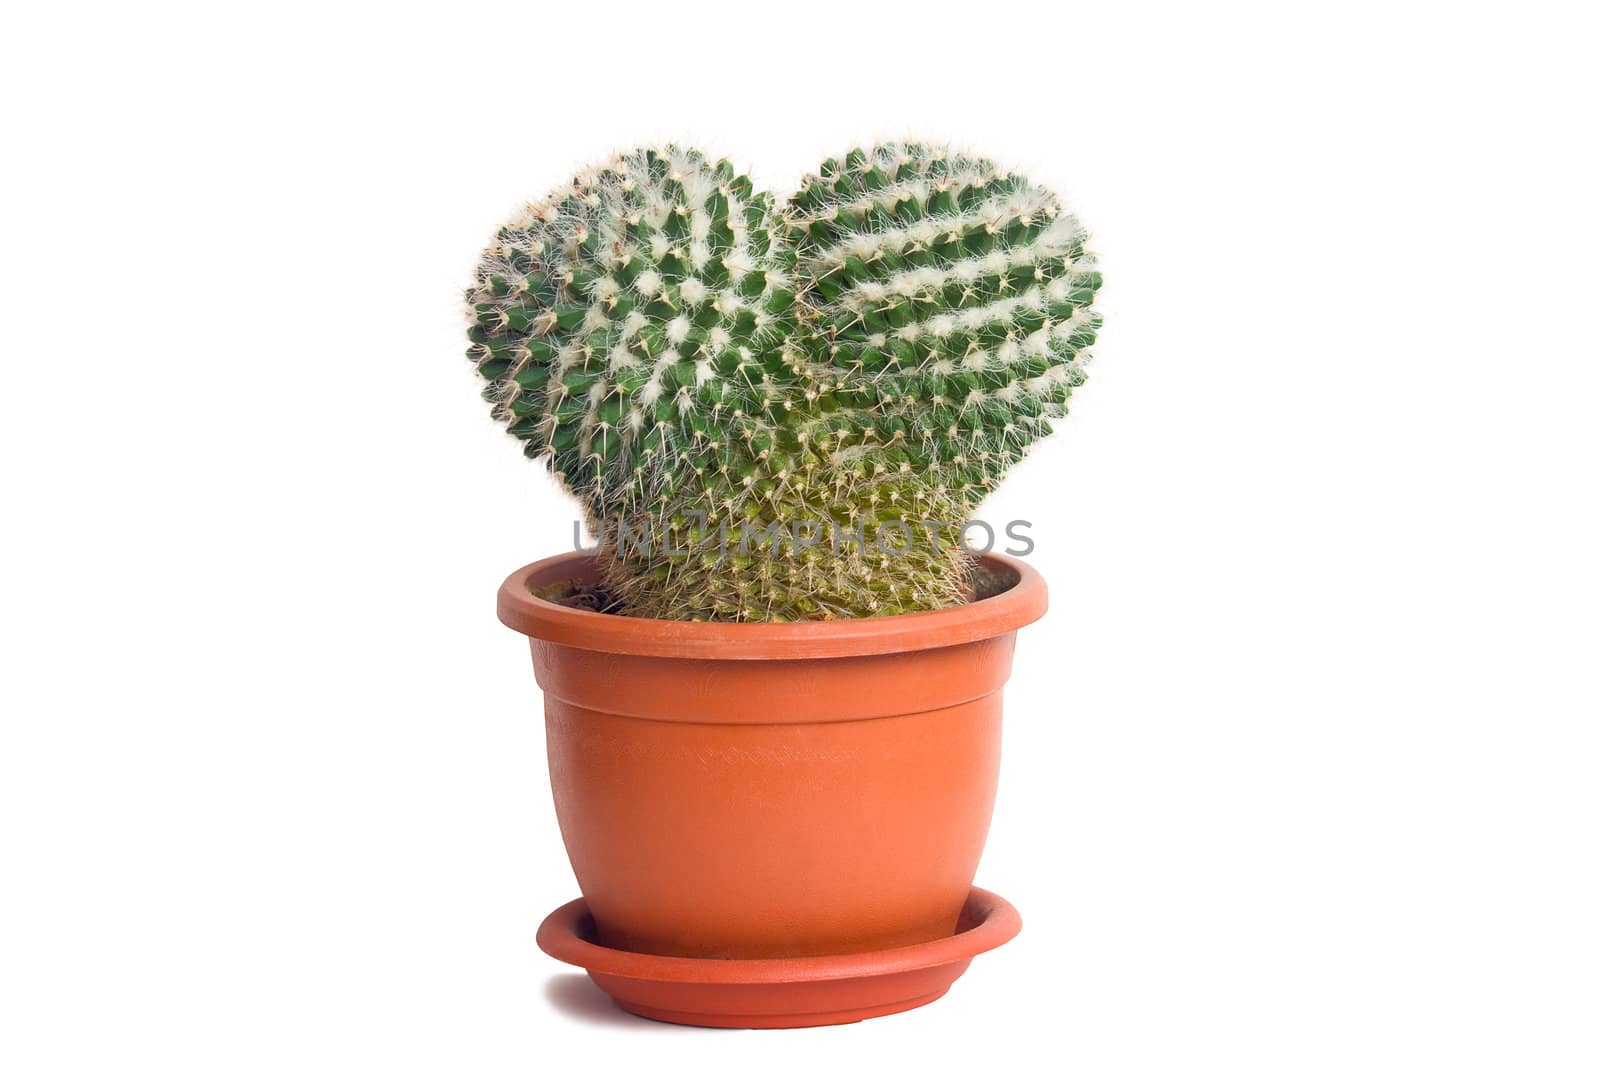 A cactus in a pot, isolated on a white background.